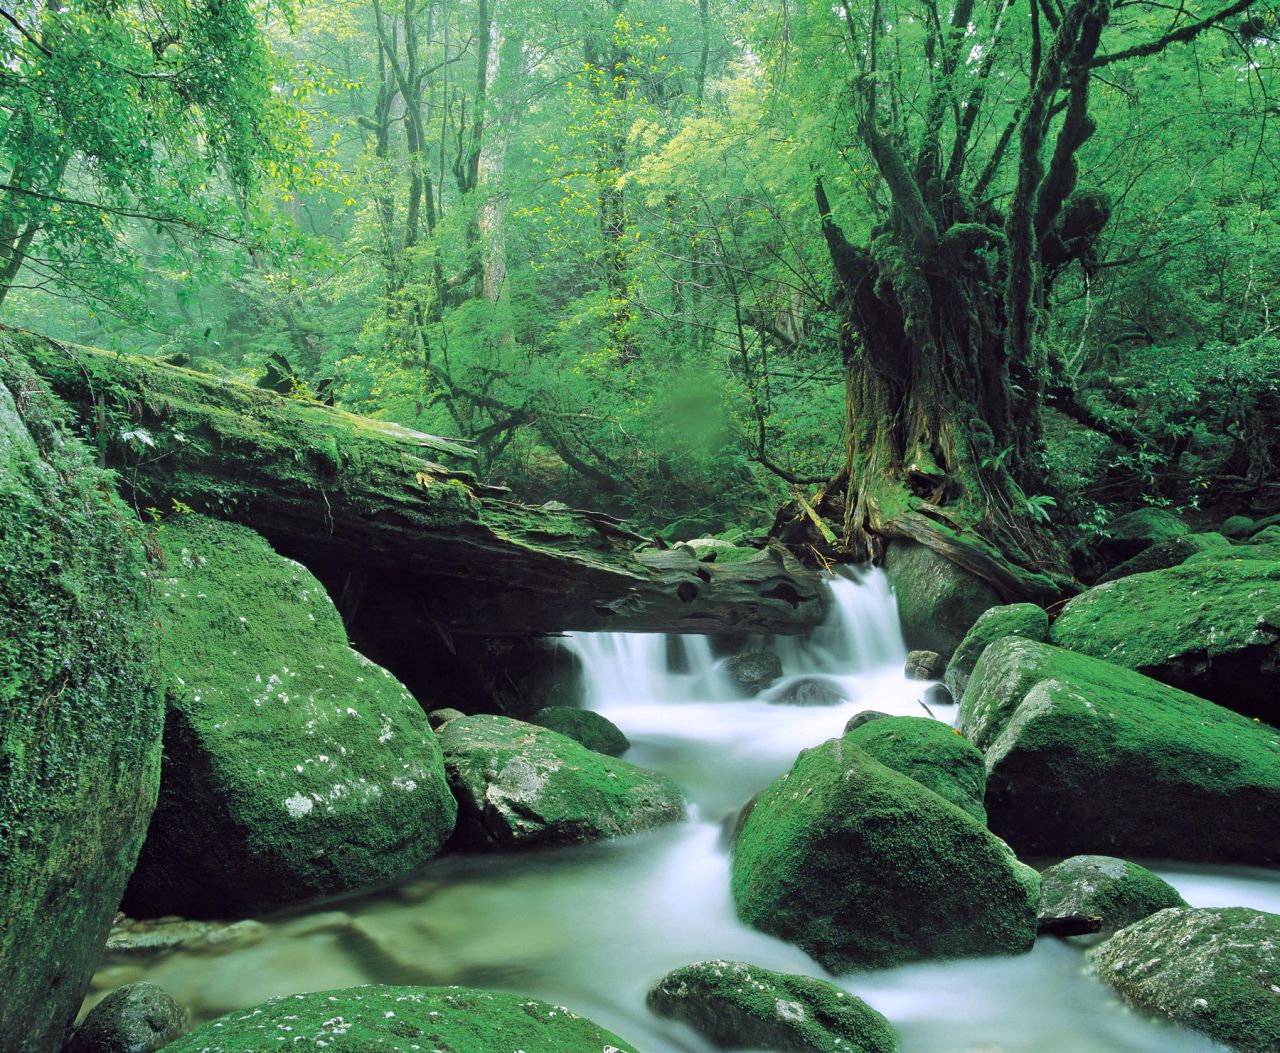 <strong>Shiratani Unsuikyo Gorge (Kagoshima): </strong>Hayao Miyazaki fans will find this forest familiar. Shiratani Unsuikyo Gorge <a href="http://www.cnn.com/2013/12/04/travel/enchanting-ancient-forests-japan-yakushima/">inspires Studio Ghibli's fantasy animation "Princess Mononoke."</a> The otherworldly nature park on Yakushima Island offers a network of maintained hiking trails along the ravine. From historic tracks built in the Edo period to developed footpaths paved in stone and wood, the circuits range from one to five hours long, varying in difficulty.